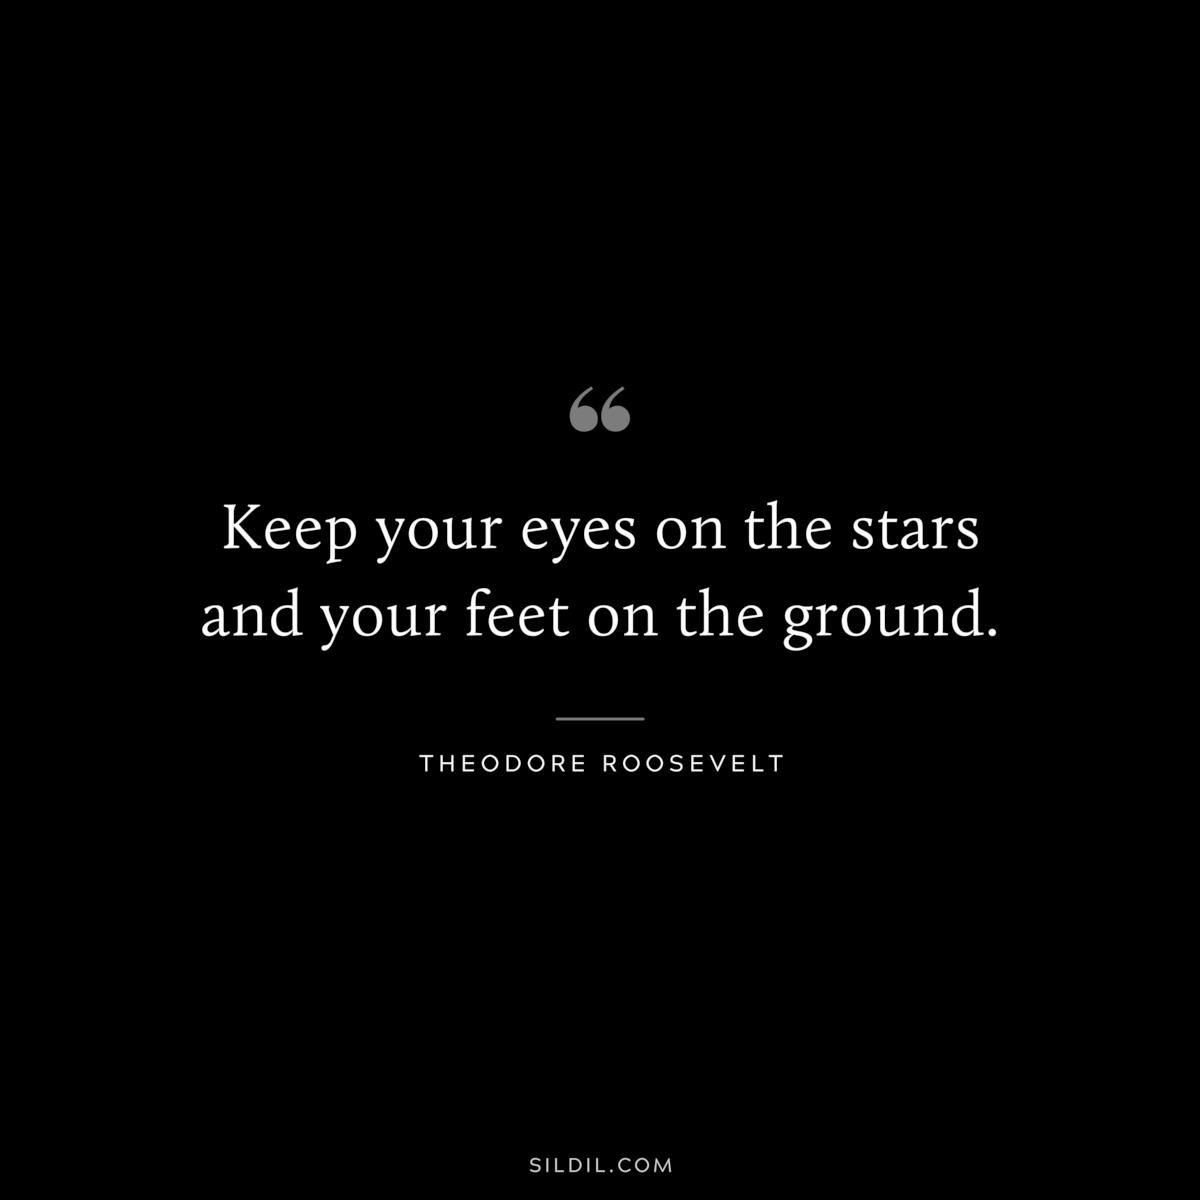 Keep your eyes on the stars and your feet on the ground. ― Theodore Roosevelt